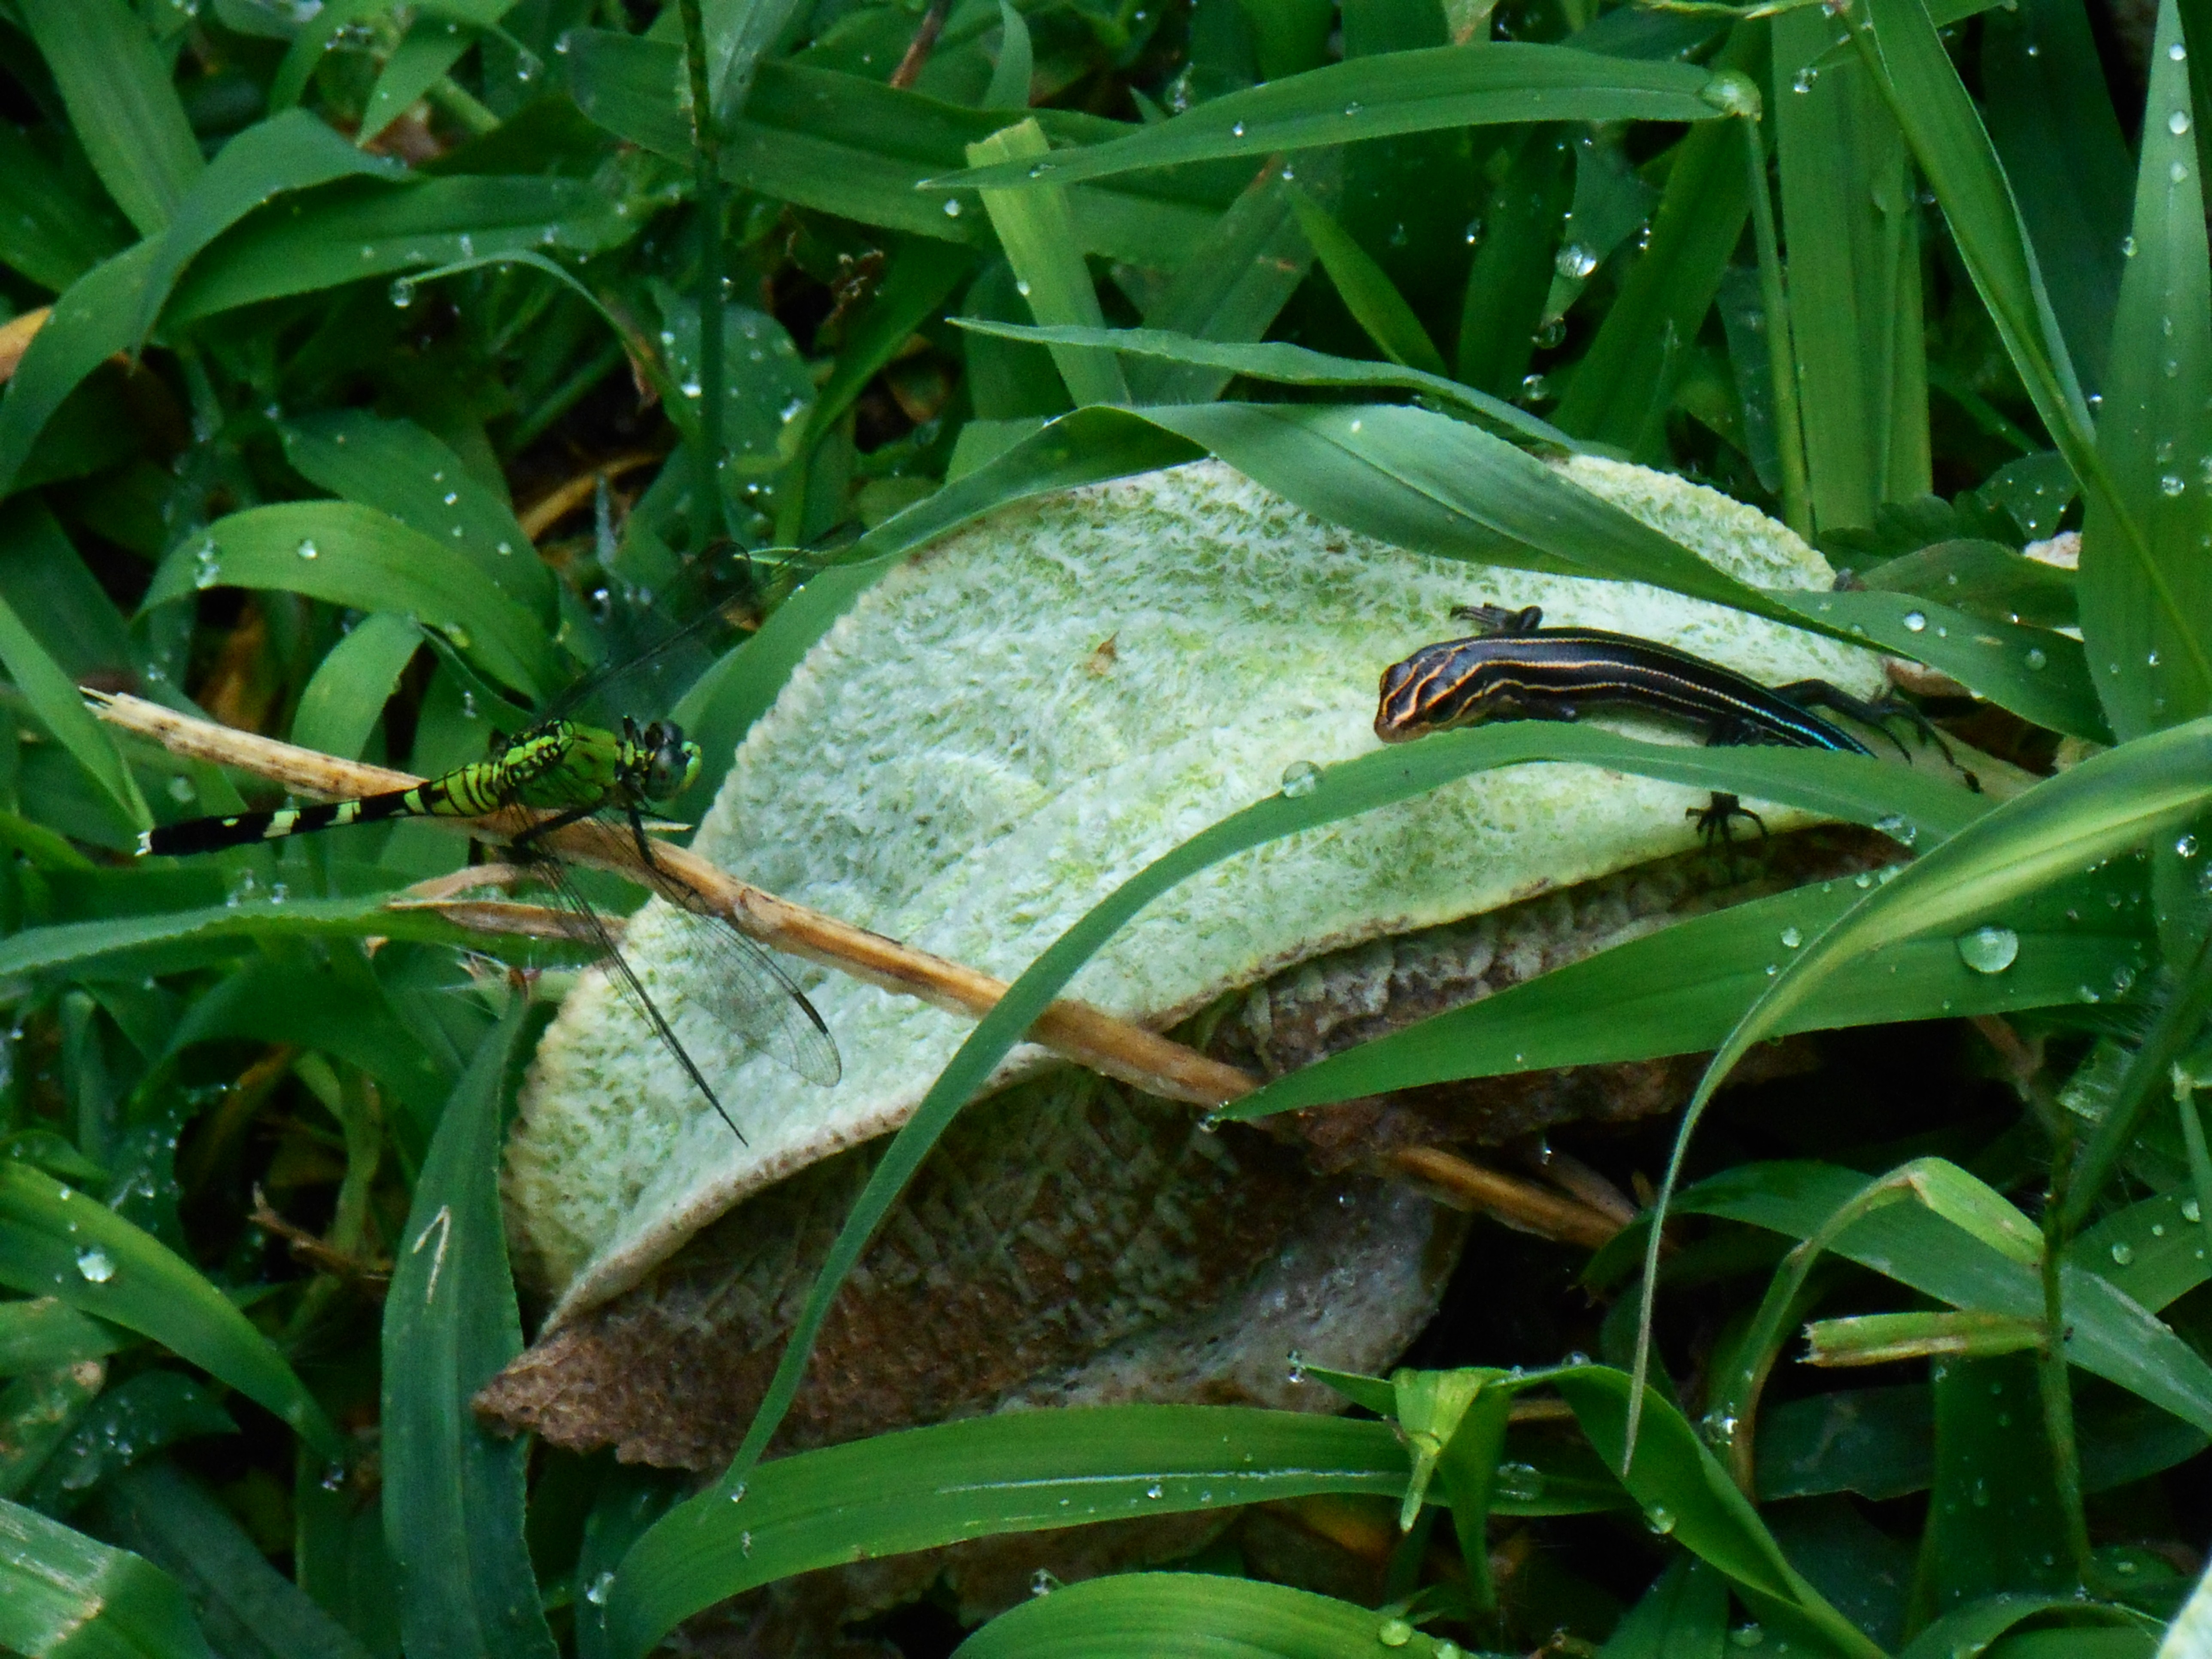 A dragonfly and Five Line Skink meet on a leaf of Lamb's Ears.  